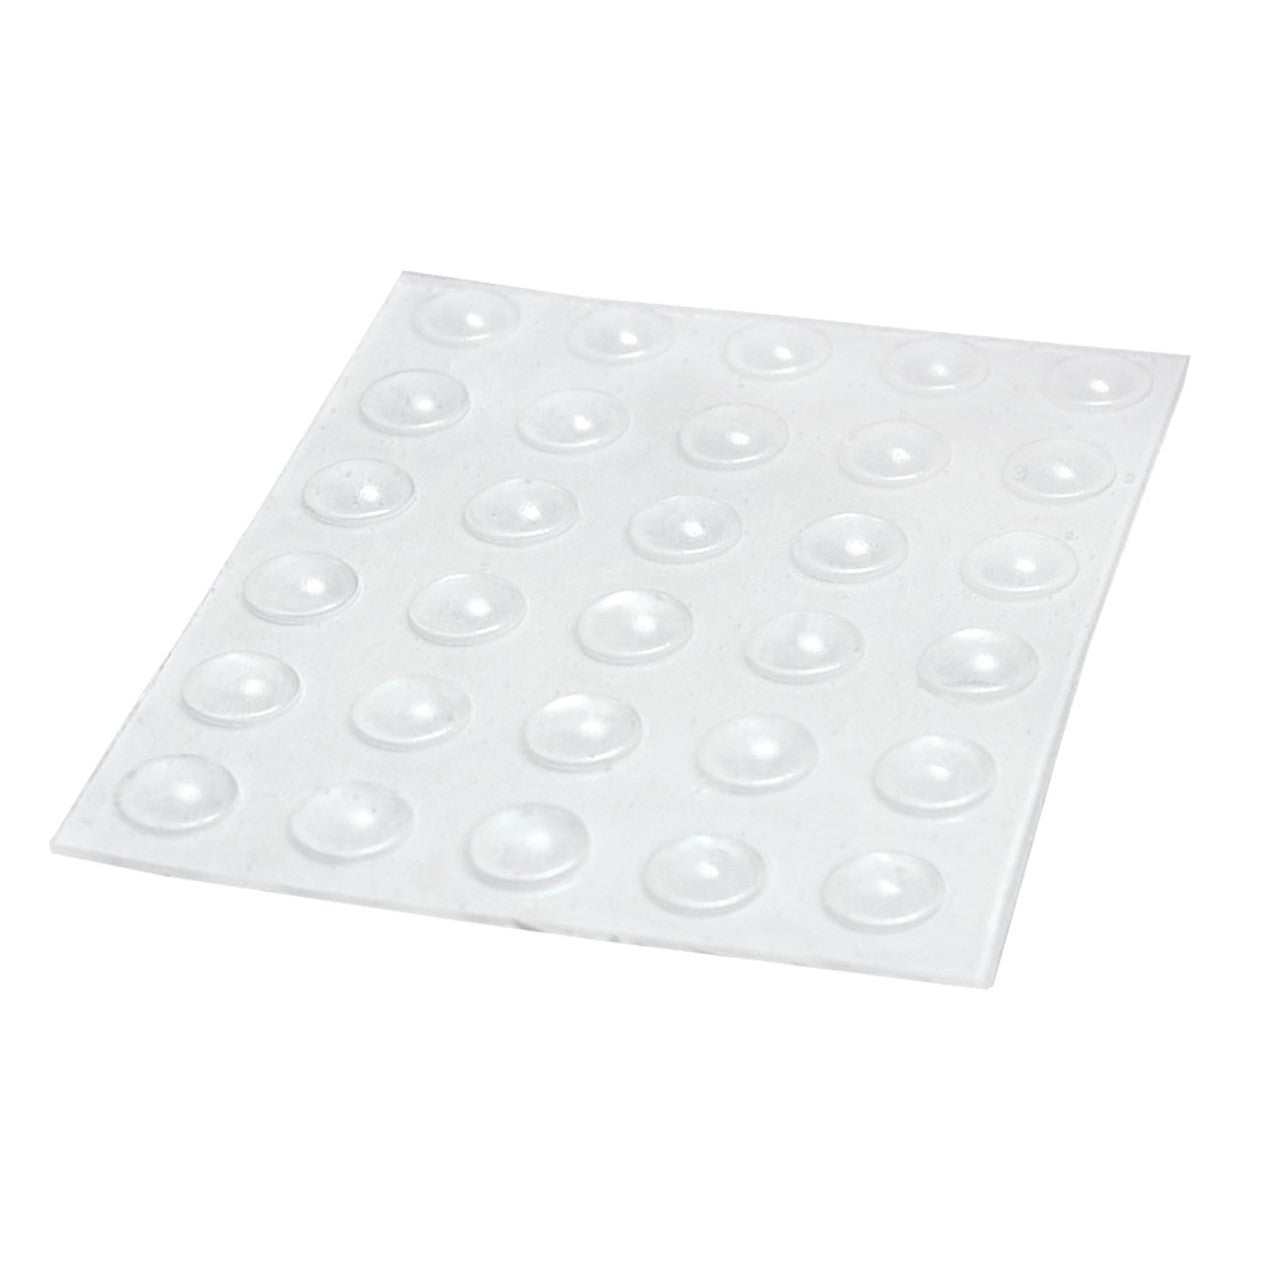 page of 30 small clear bump dots